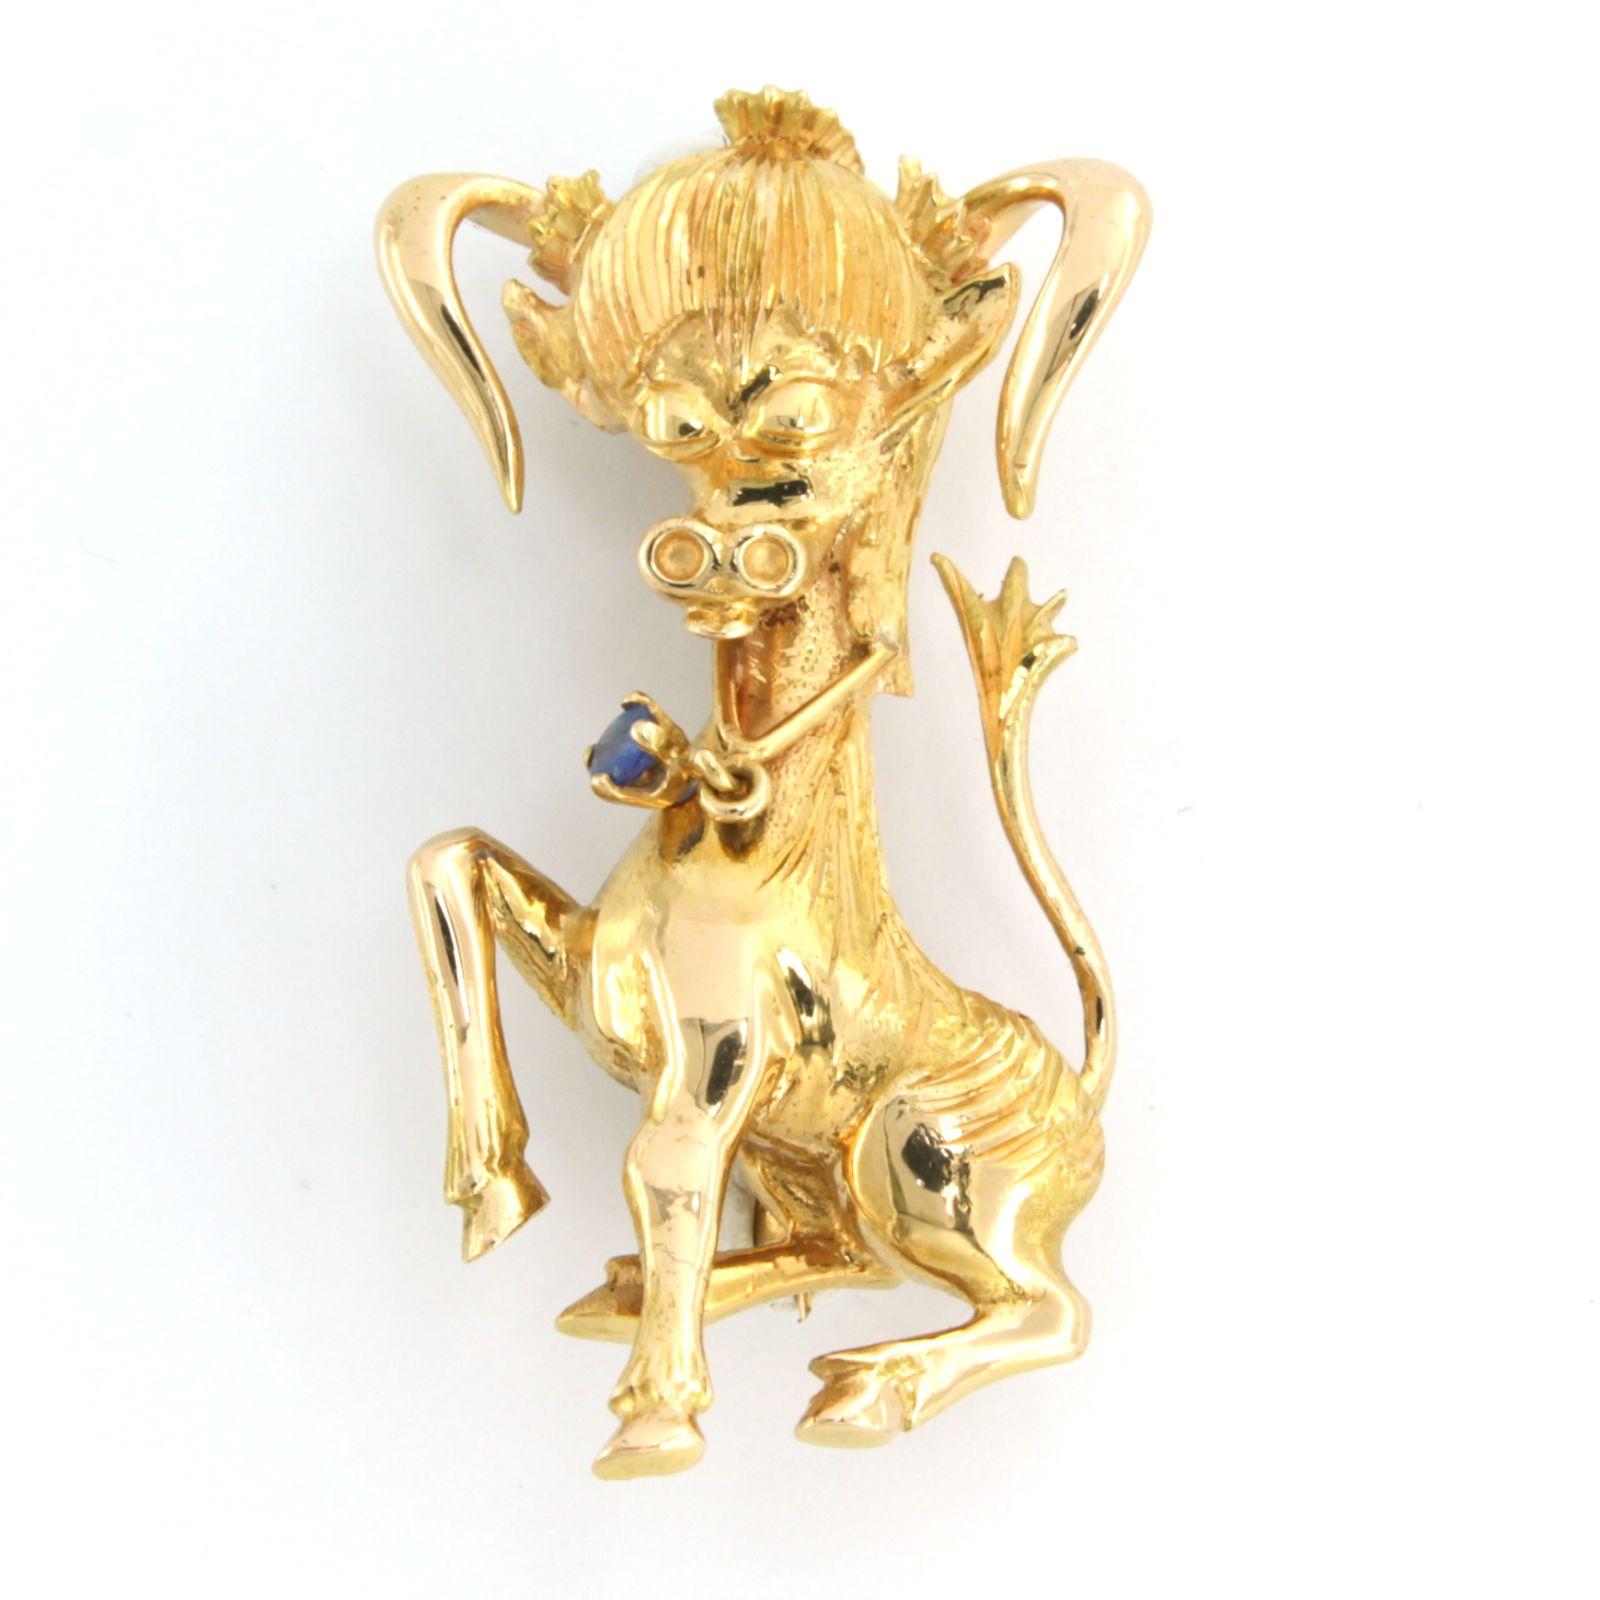 18k yellow gold brooch in the shape of a horse set with a sapphire - size 5.7 cm x 2.5 cm

Detailed description

the size of the brooch is 5.7 cm by 2.5 cm wide

weight 14.2 grams

set with

- 1 x 2.0 mm round facet cut heated sapphire

Color